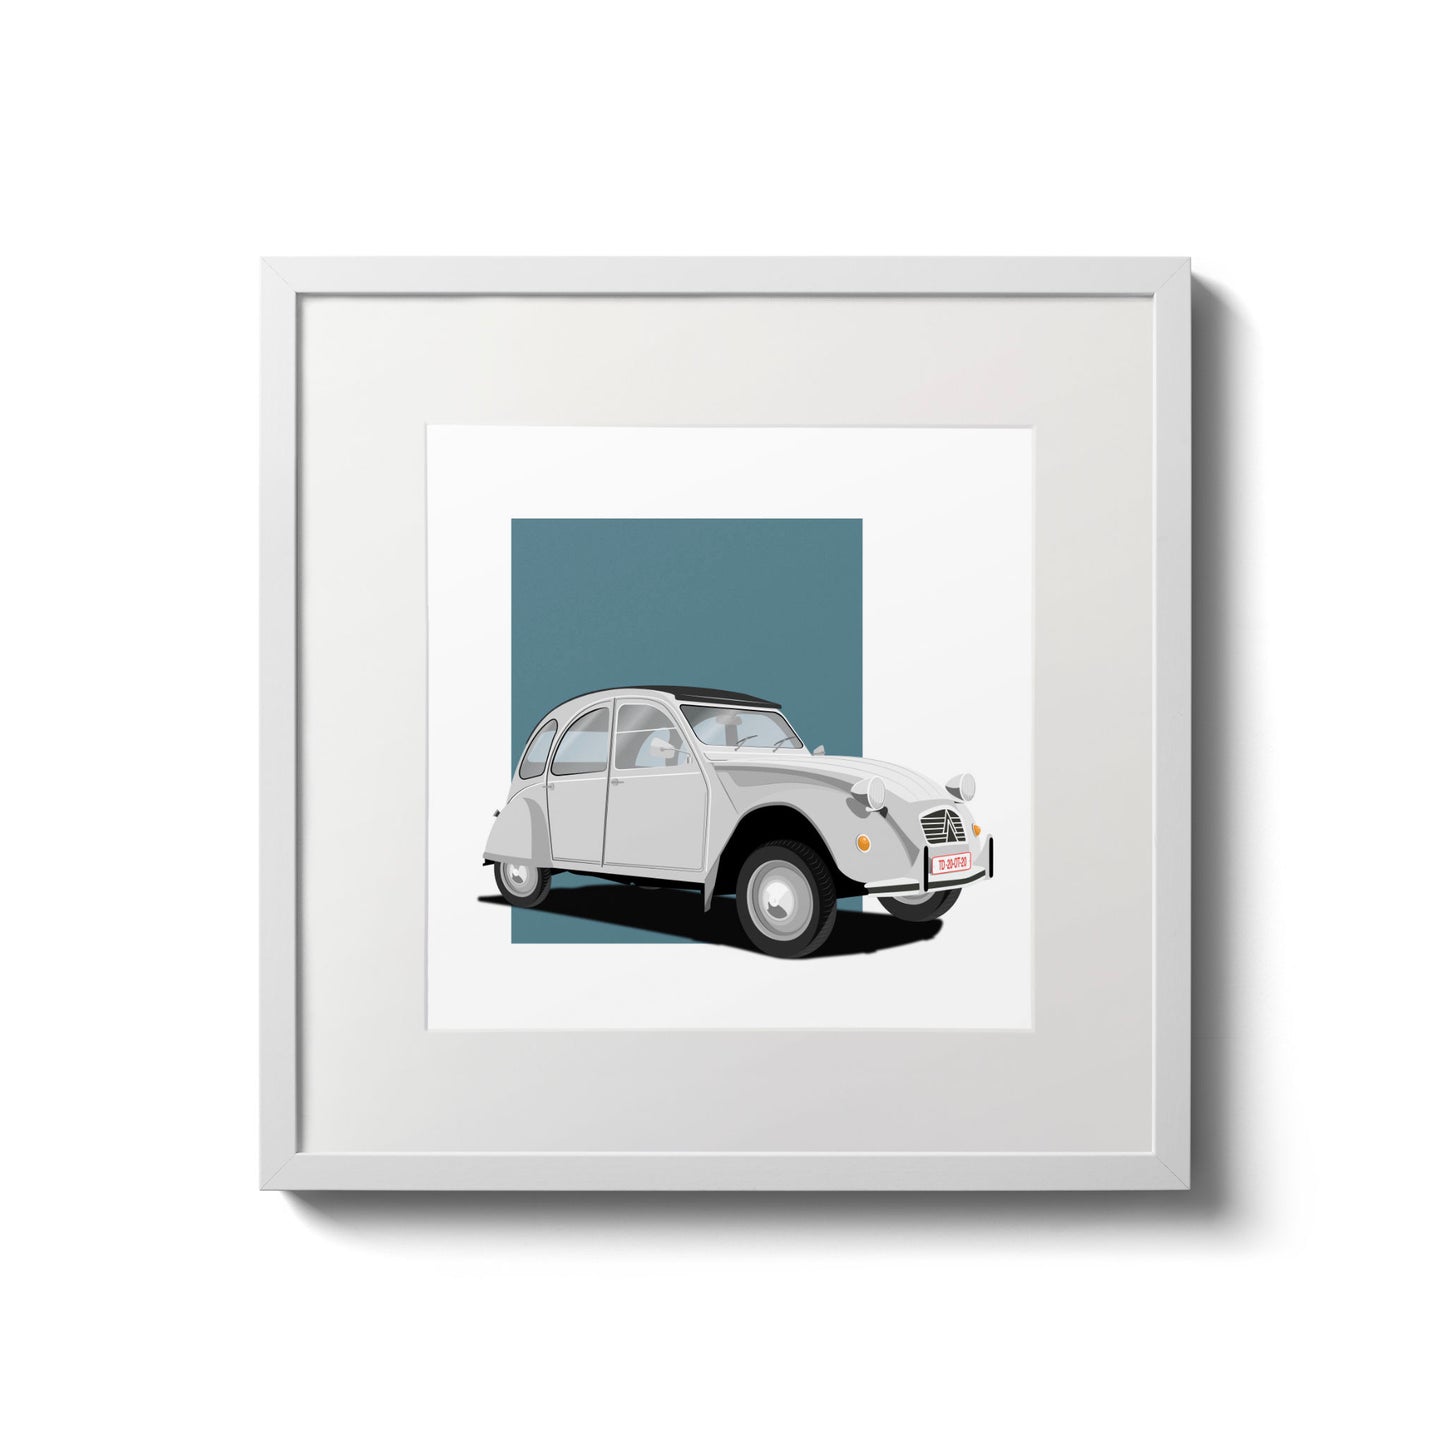 Illustration of a white Citroën 2CV, in a white frame and measuring 20 by 20 cm